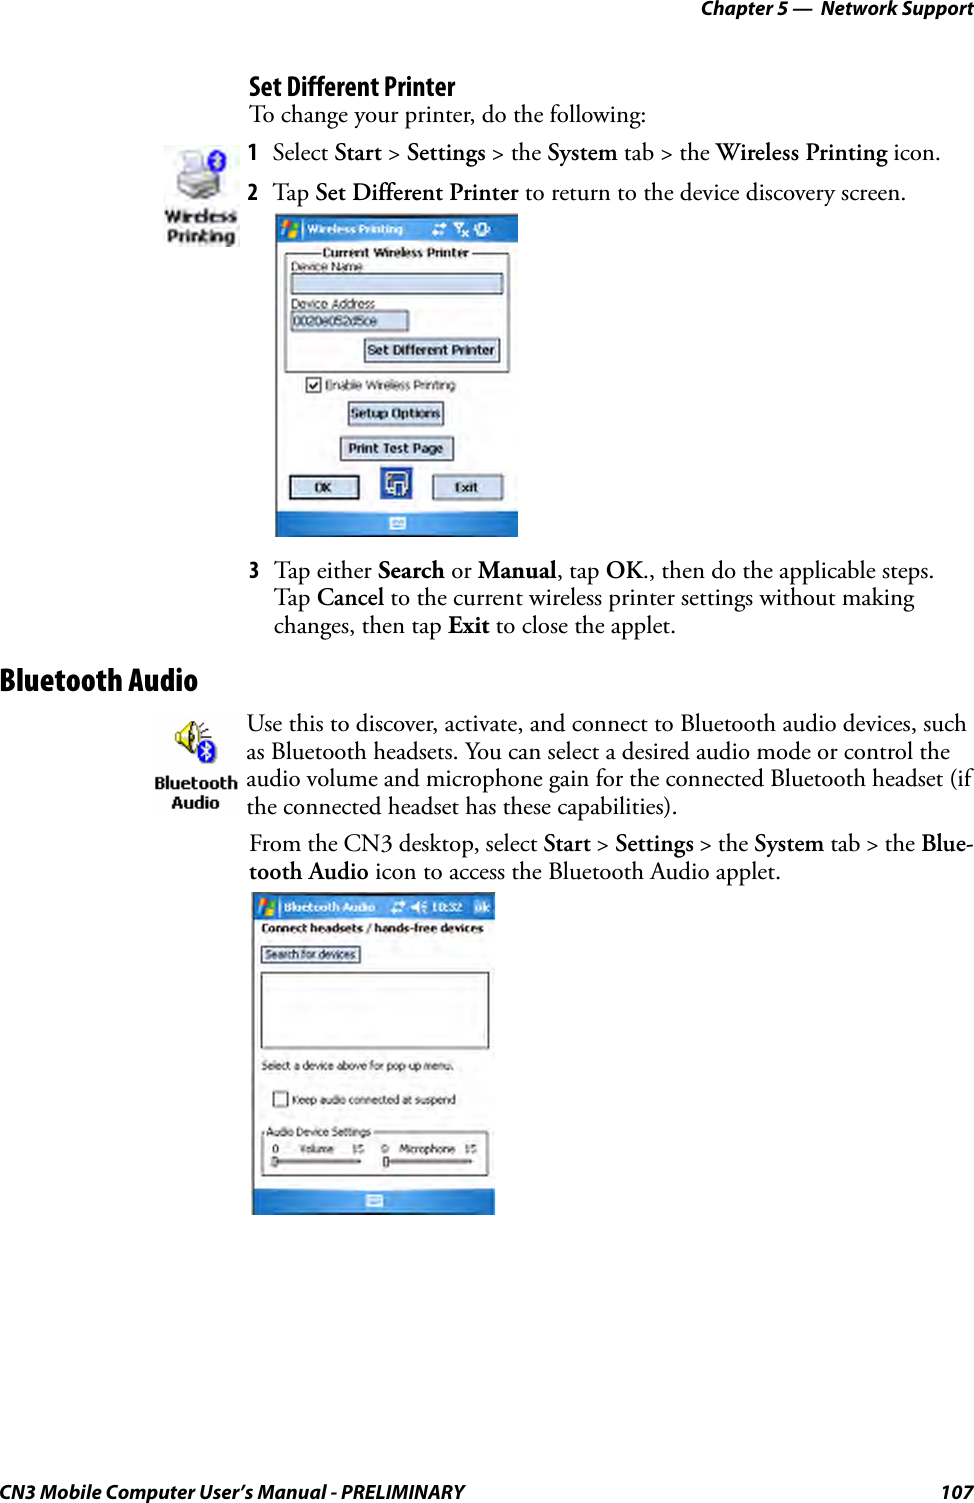 Chapter 5 —  Network SupportCN3 Mobile Computer User’s Manual - PRELIMINARY 107Set Different PrinterTo change your printer, do the following:3Tap either Search or Manual, tap OK., then do the applicable steps. Tap  Cancel to the current wireless printer settings without making changes, then tap Exit to close the applet.Bluetooth AudioFrom the CN3 desktop, select Start &gt; Settings &gt; the System tab &gt; the Blue-tooth Audio icon to access the Bluetooth Audio applet.1Select Start &gt; Settings &gt; the System tab &gt; the Wireless Printing icon.2Tap Set Different Printer to return to the device discovery screen.Use this to discover, activate, and connect to Bluetooth audio devices, such as Bluetooth headsets. You can select a desired audio mode or control the audio volume and microphone gain for the connected Bluetooth headset (if the connected headset has these capabilities).